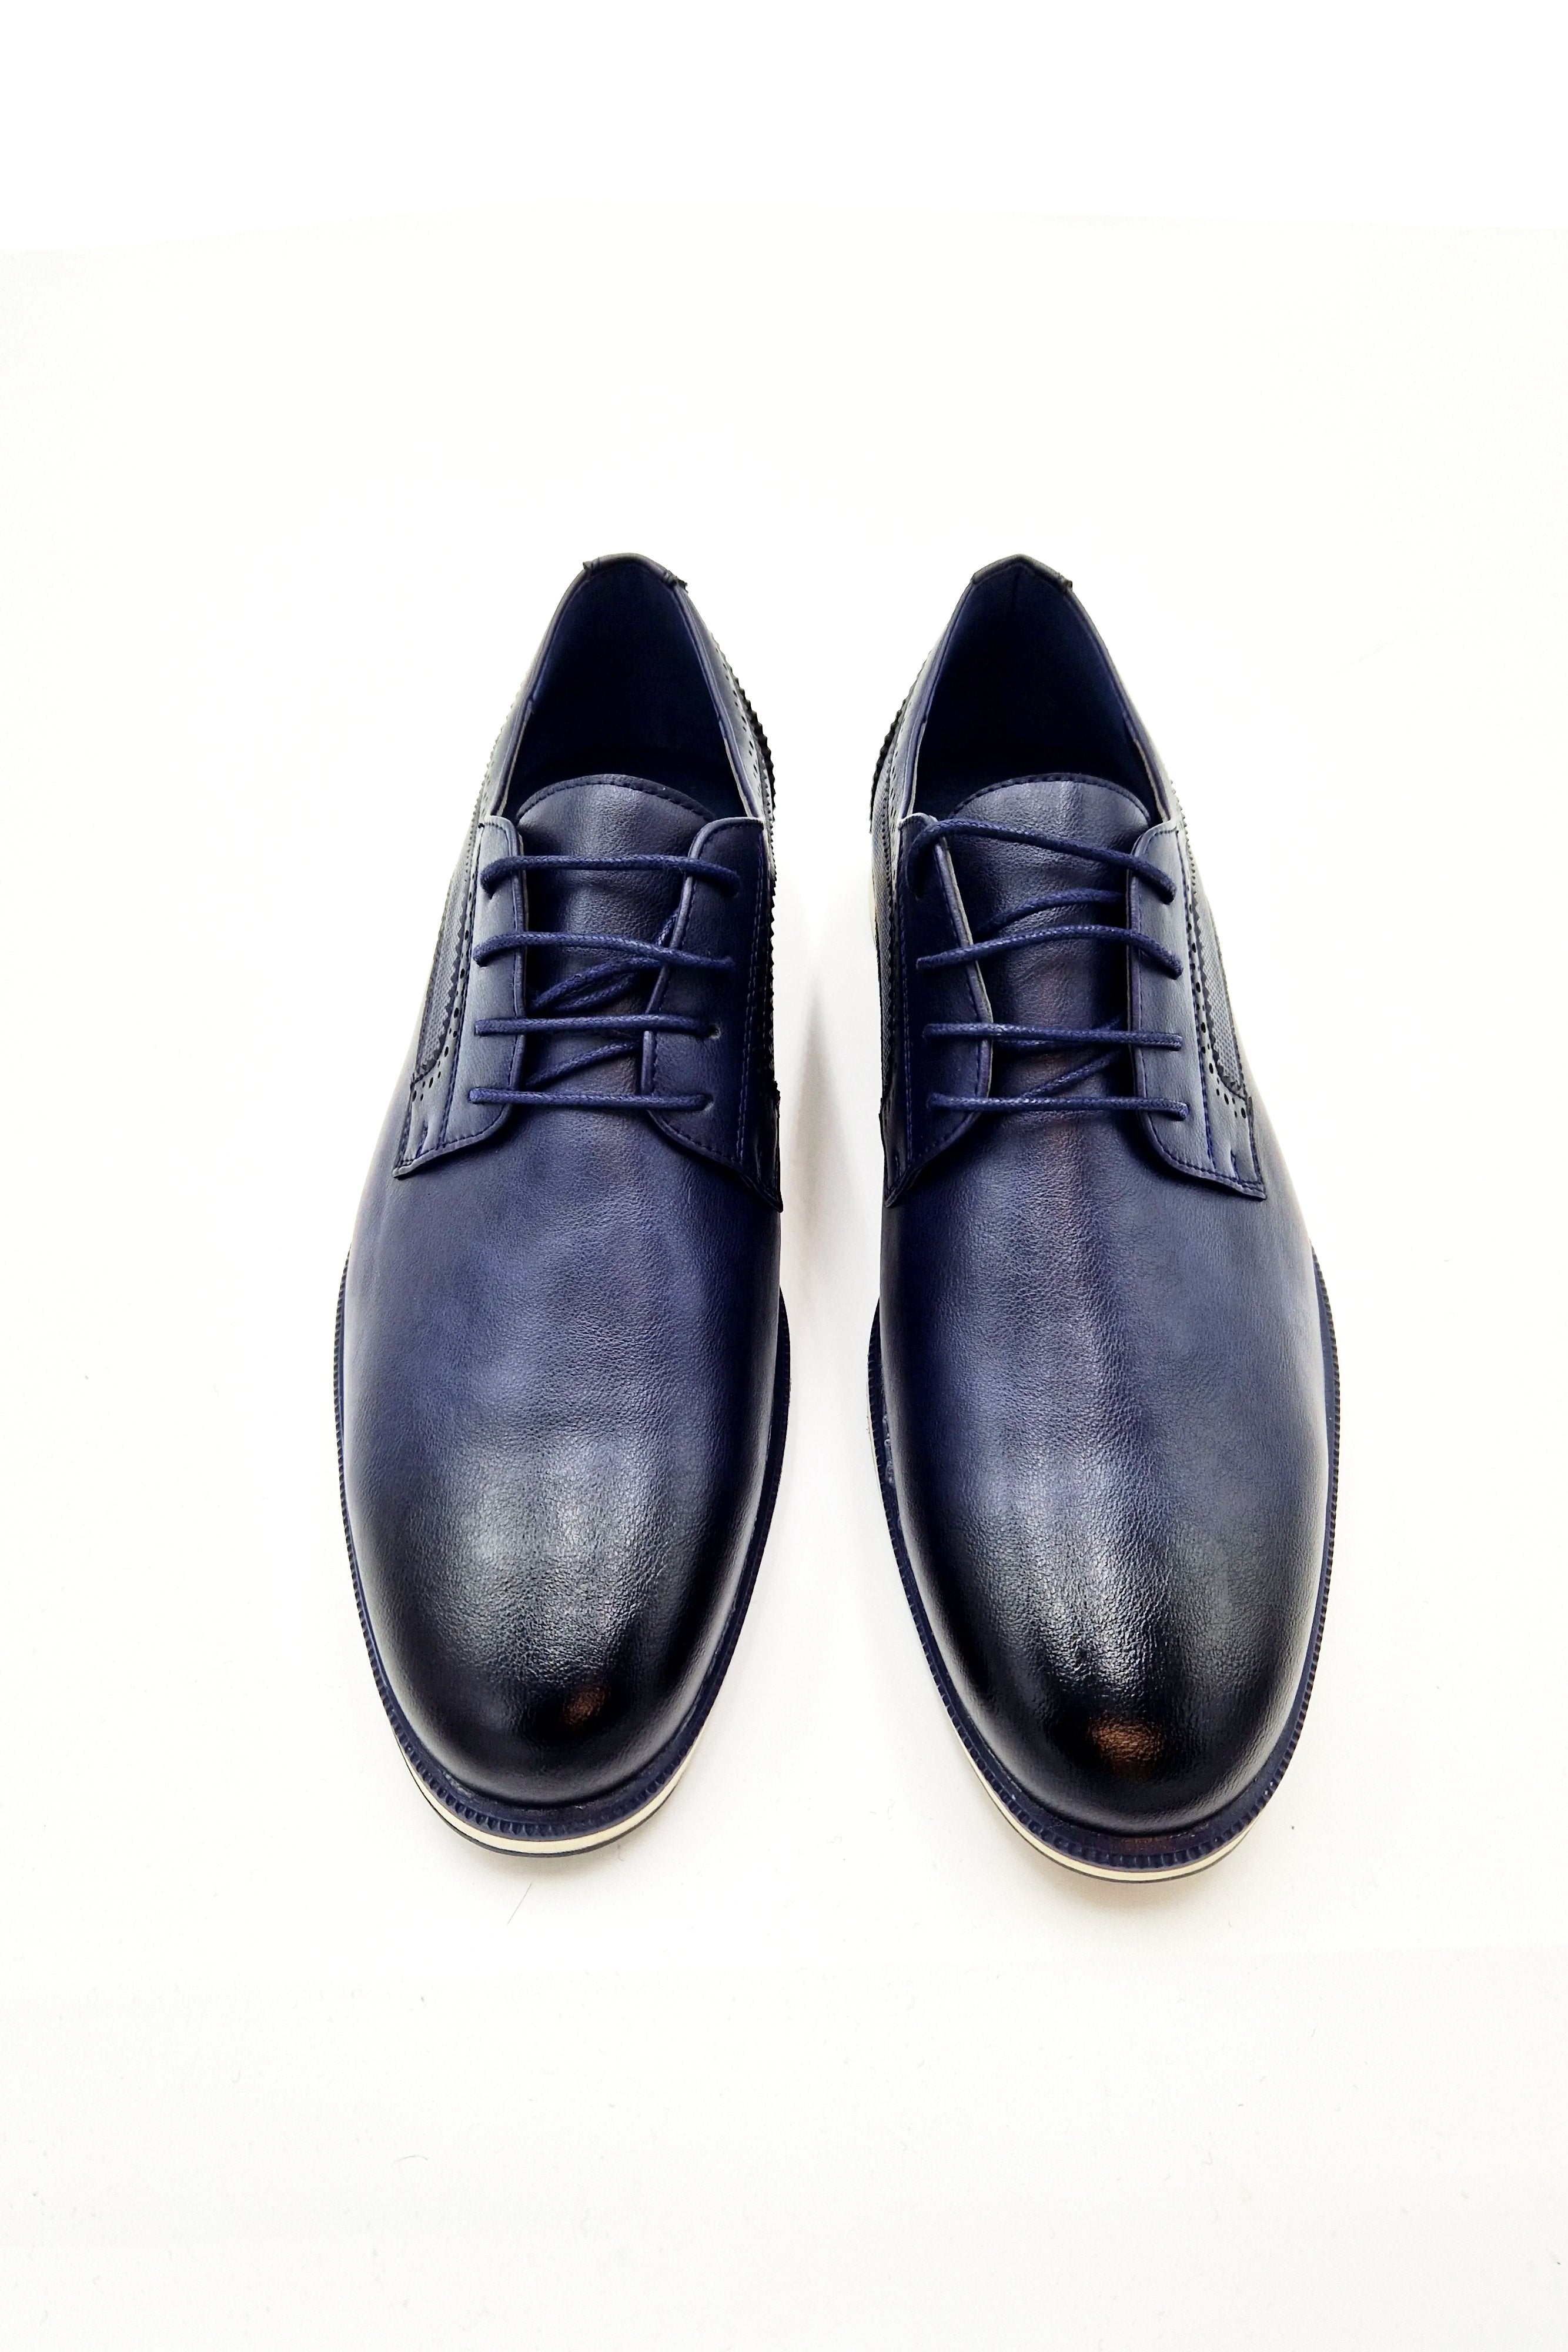 Boomerang Navy Lace up Shoe front